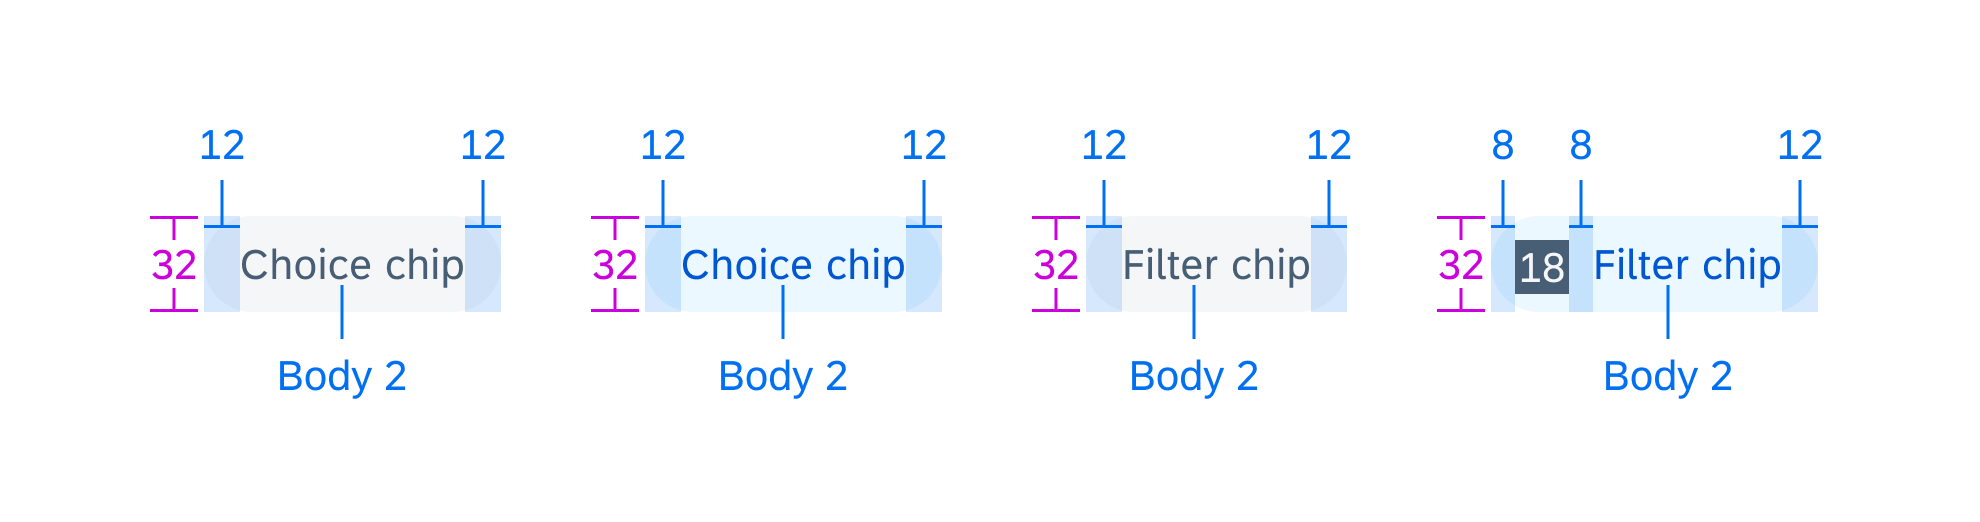 Choice chips and filter chips specifications